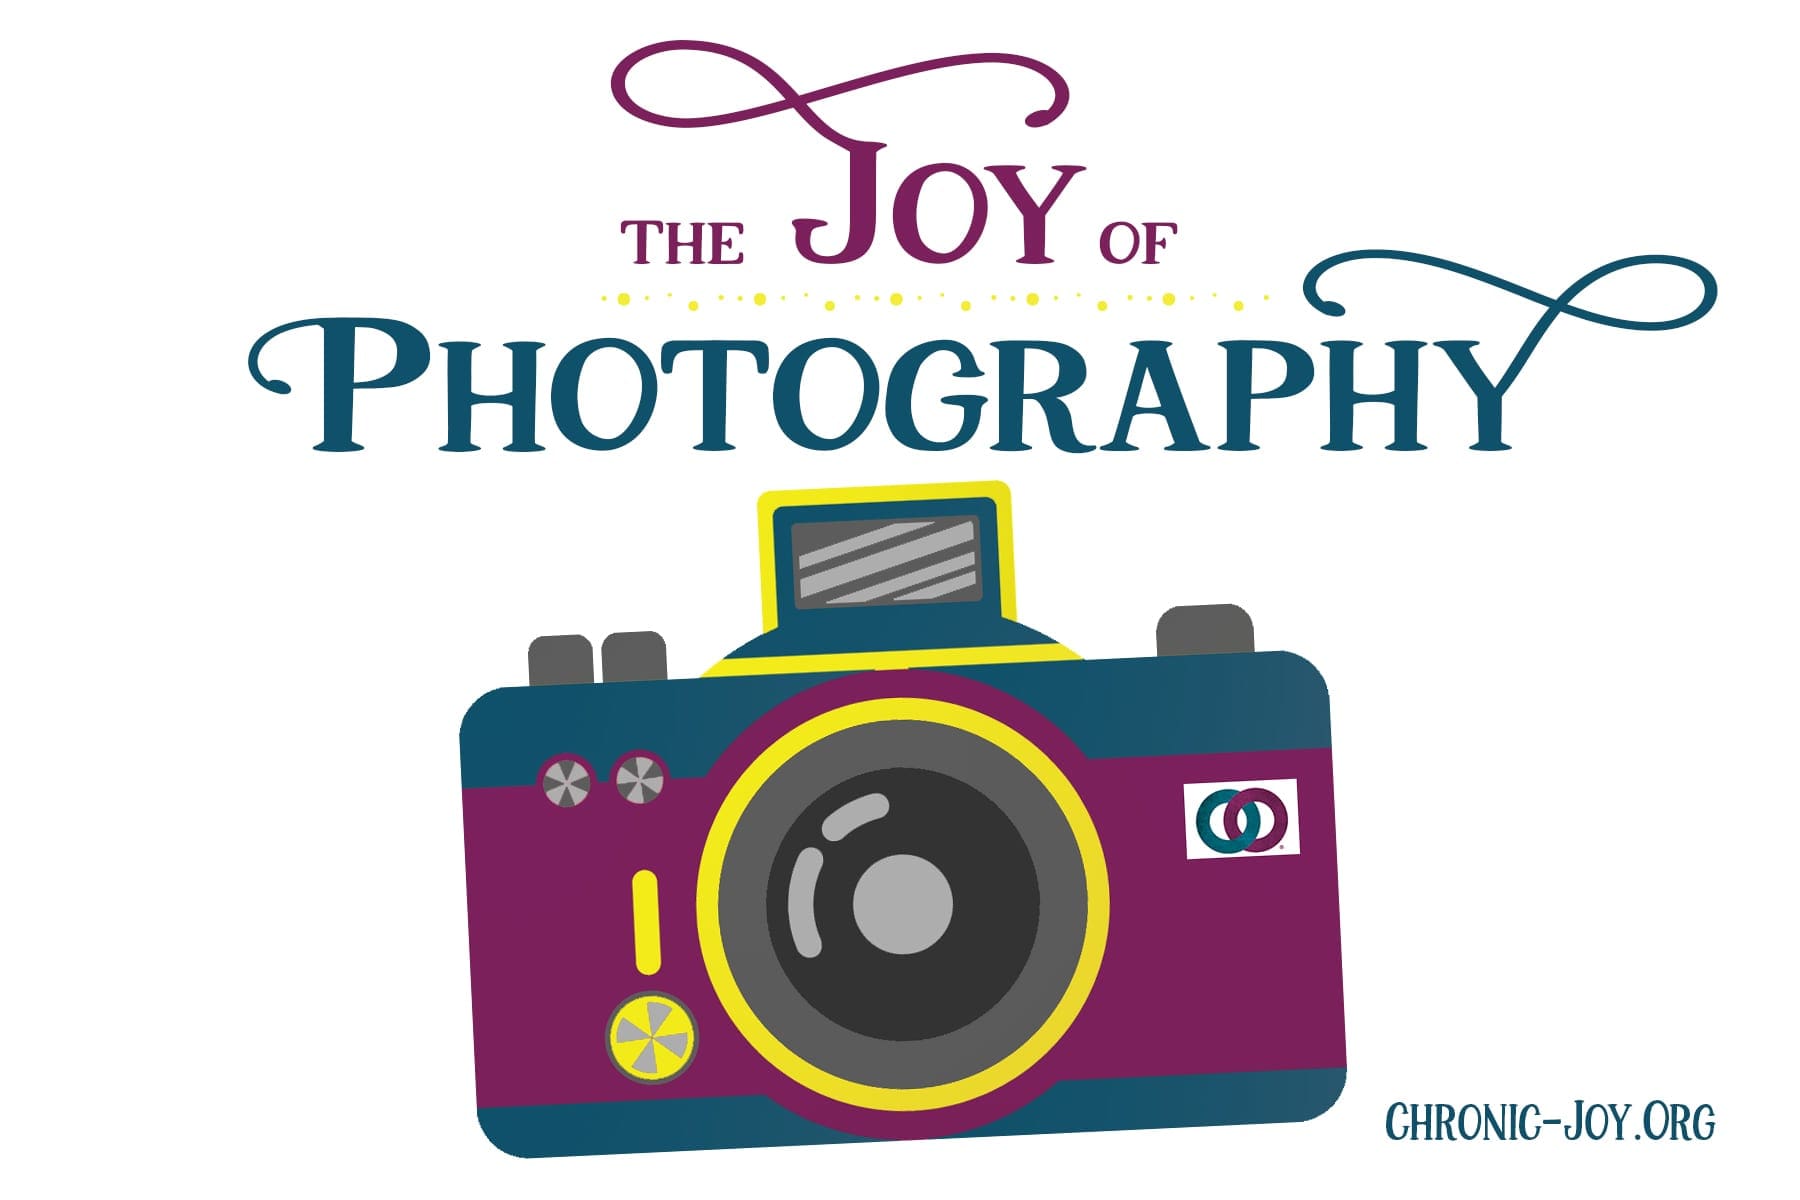 The Joy of Photography